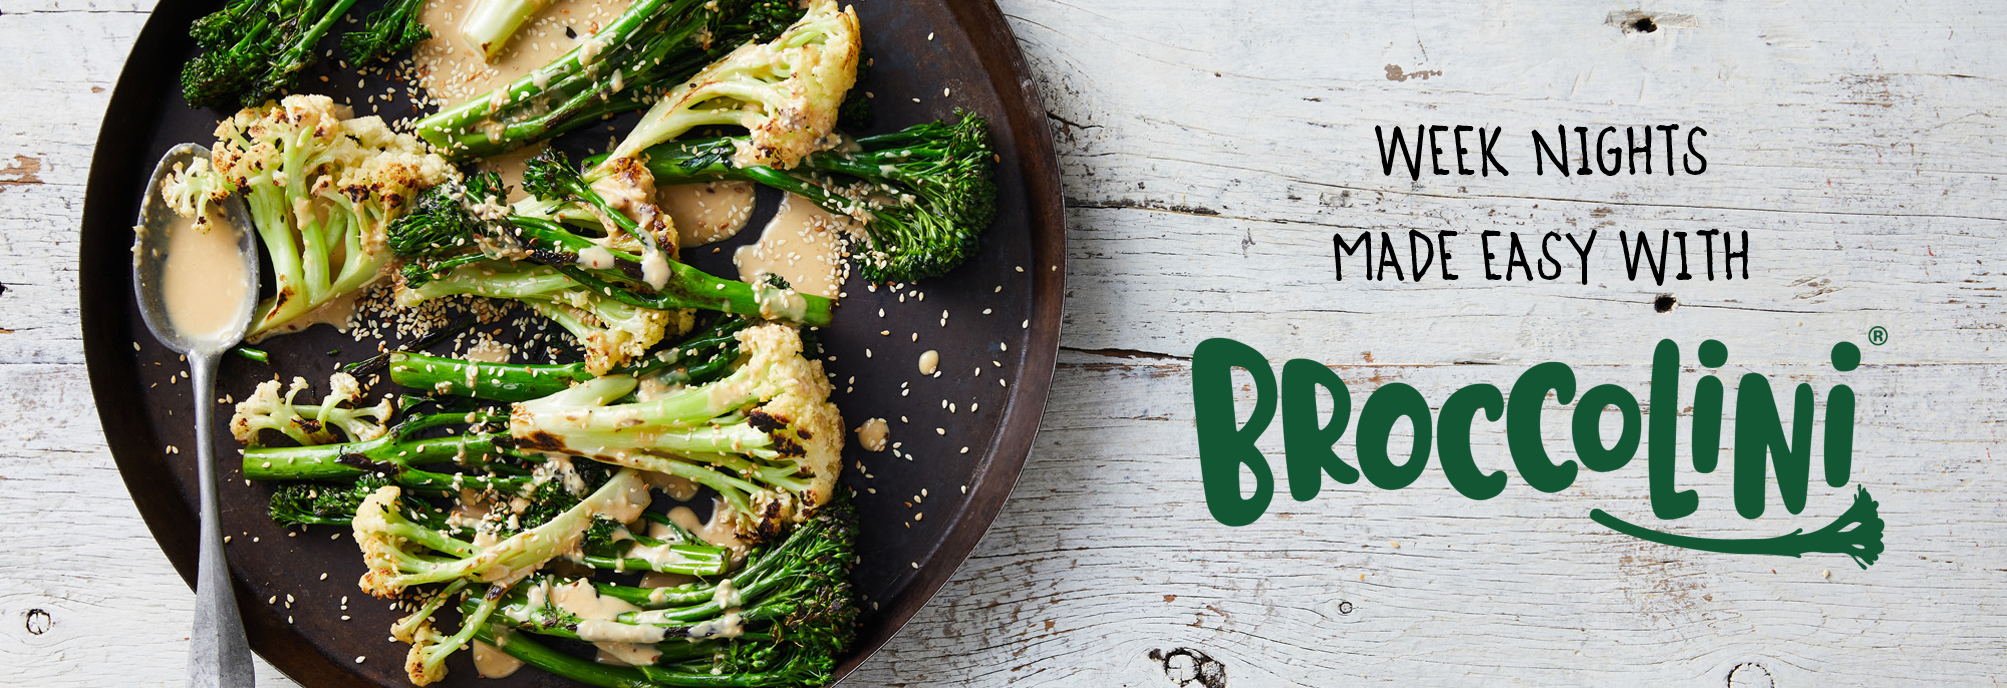 Weeknight dinners made easy with broccolini